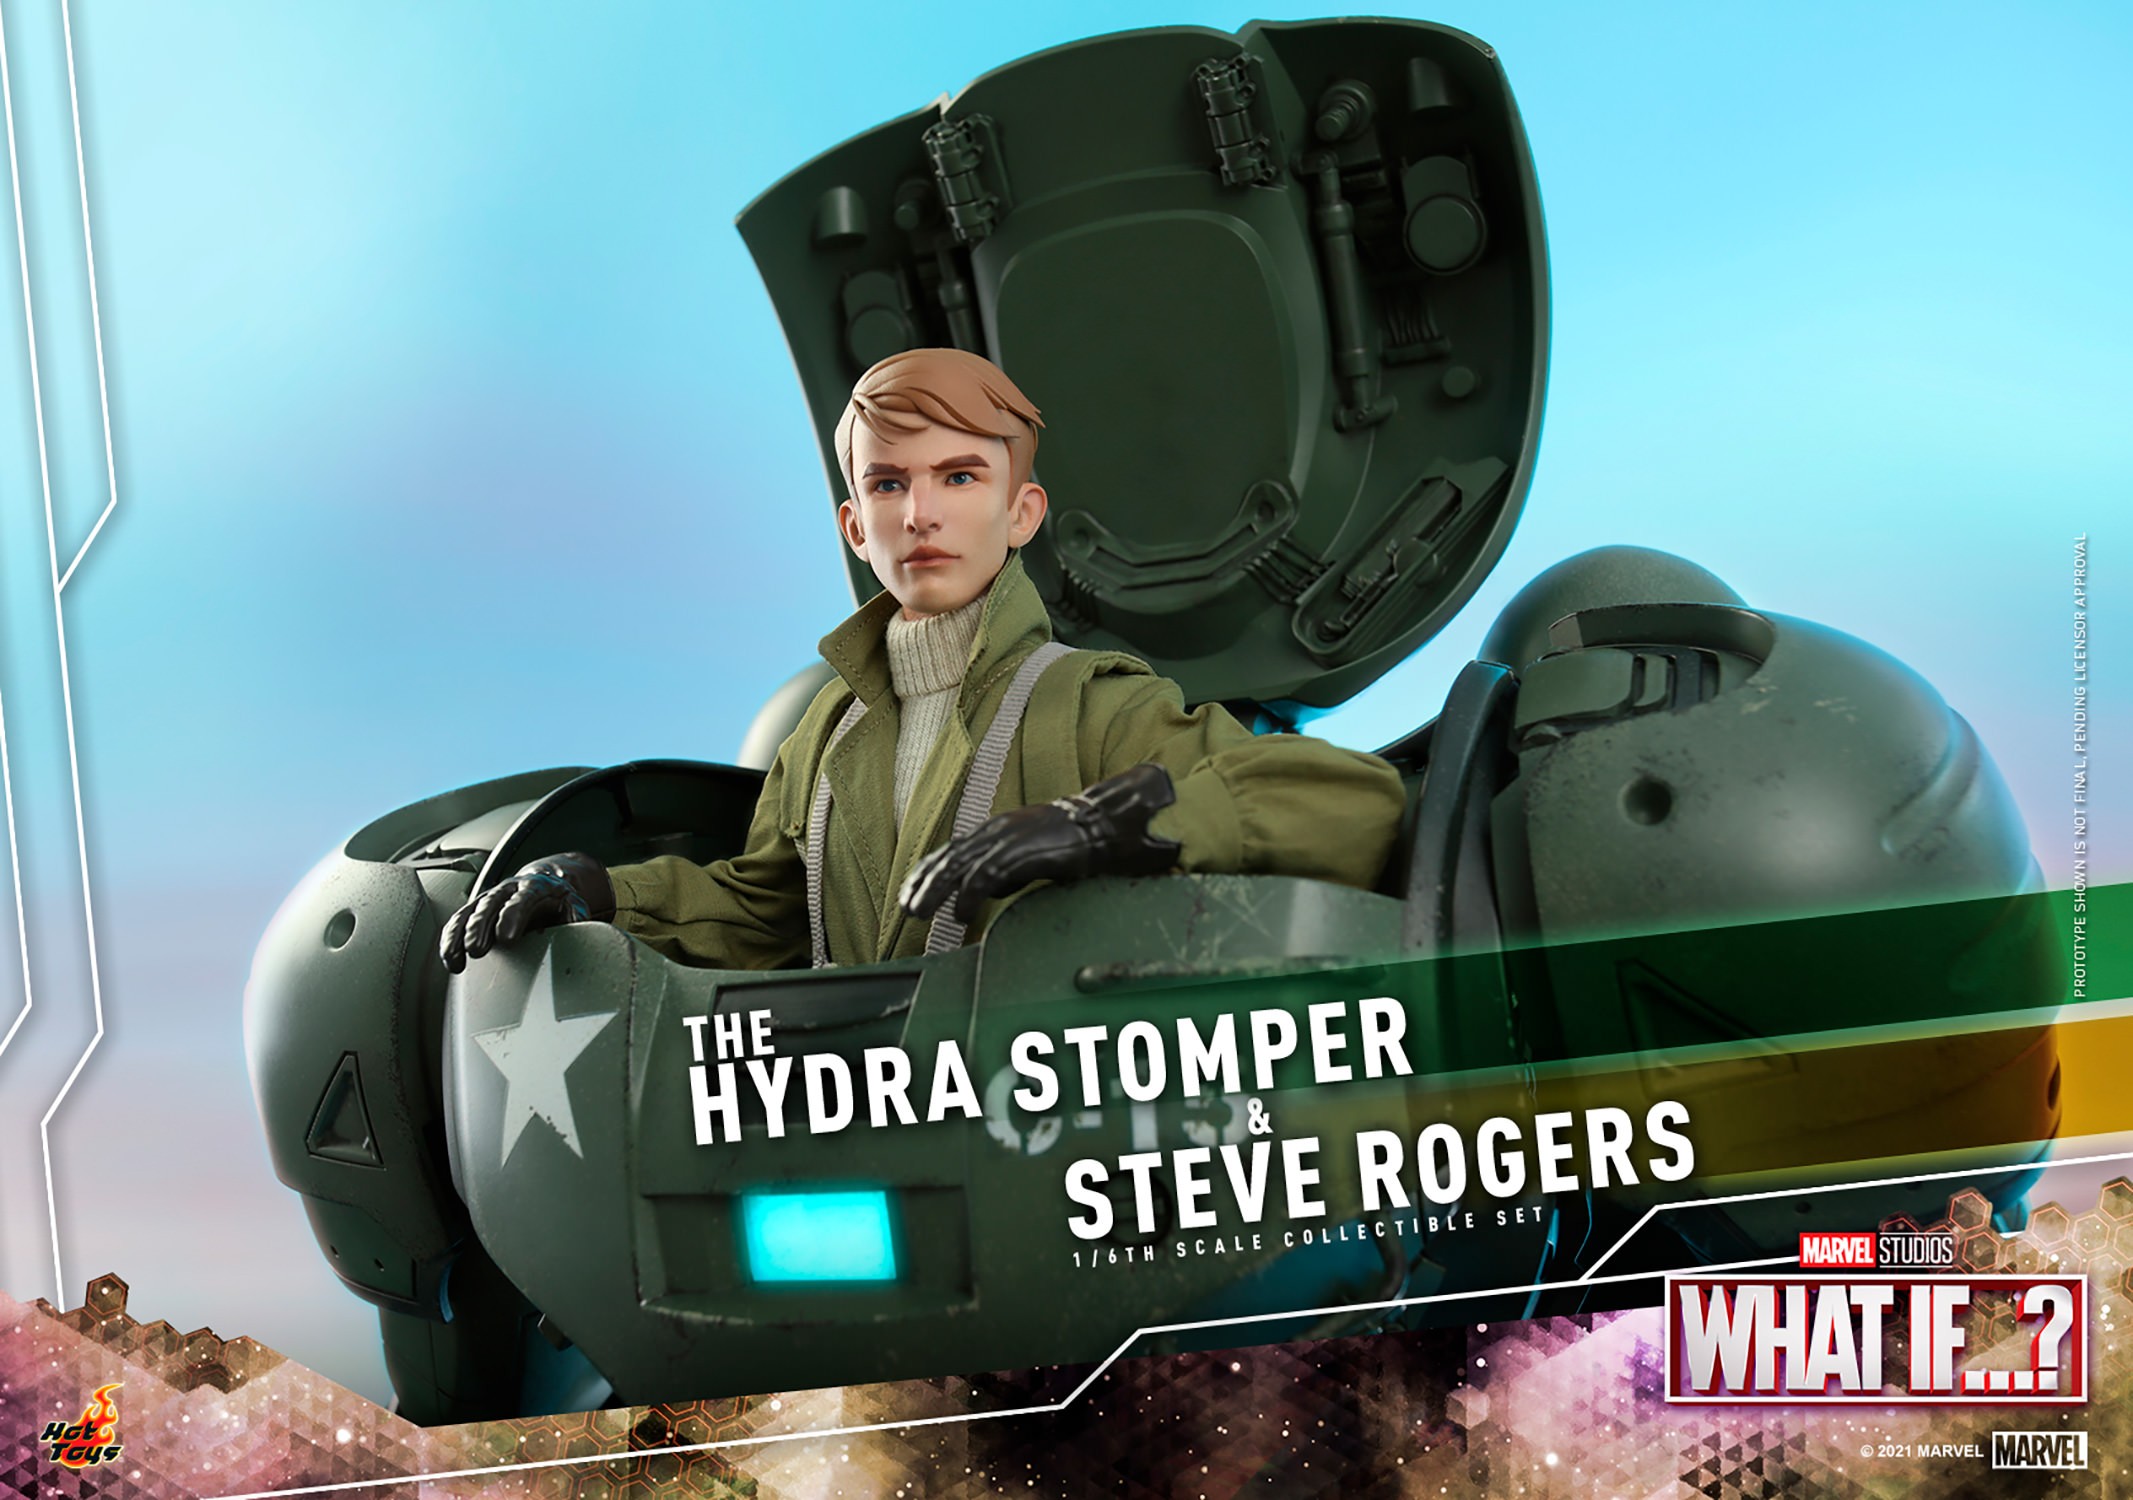 Steve Rogers and The Hydra Stomper